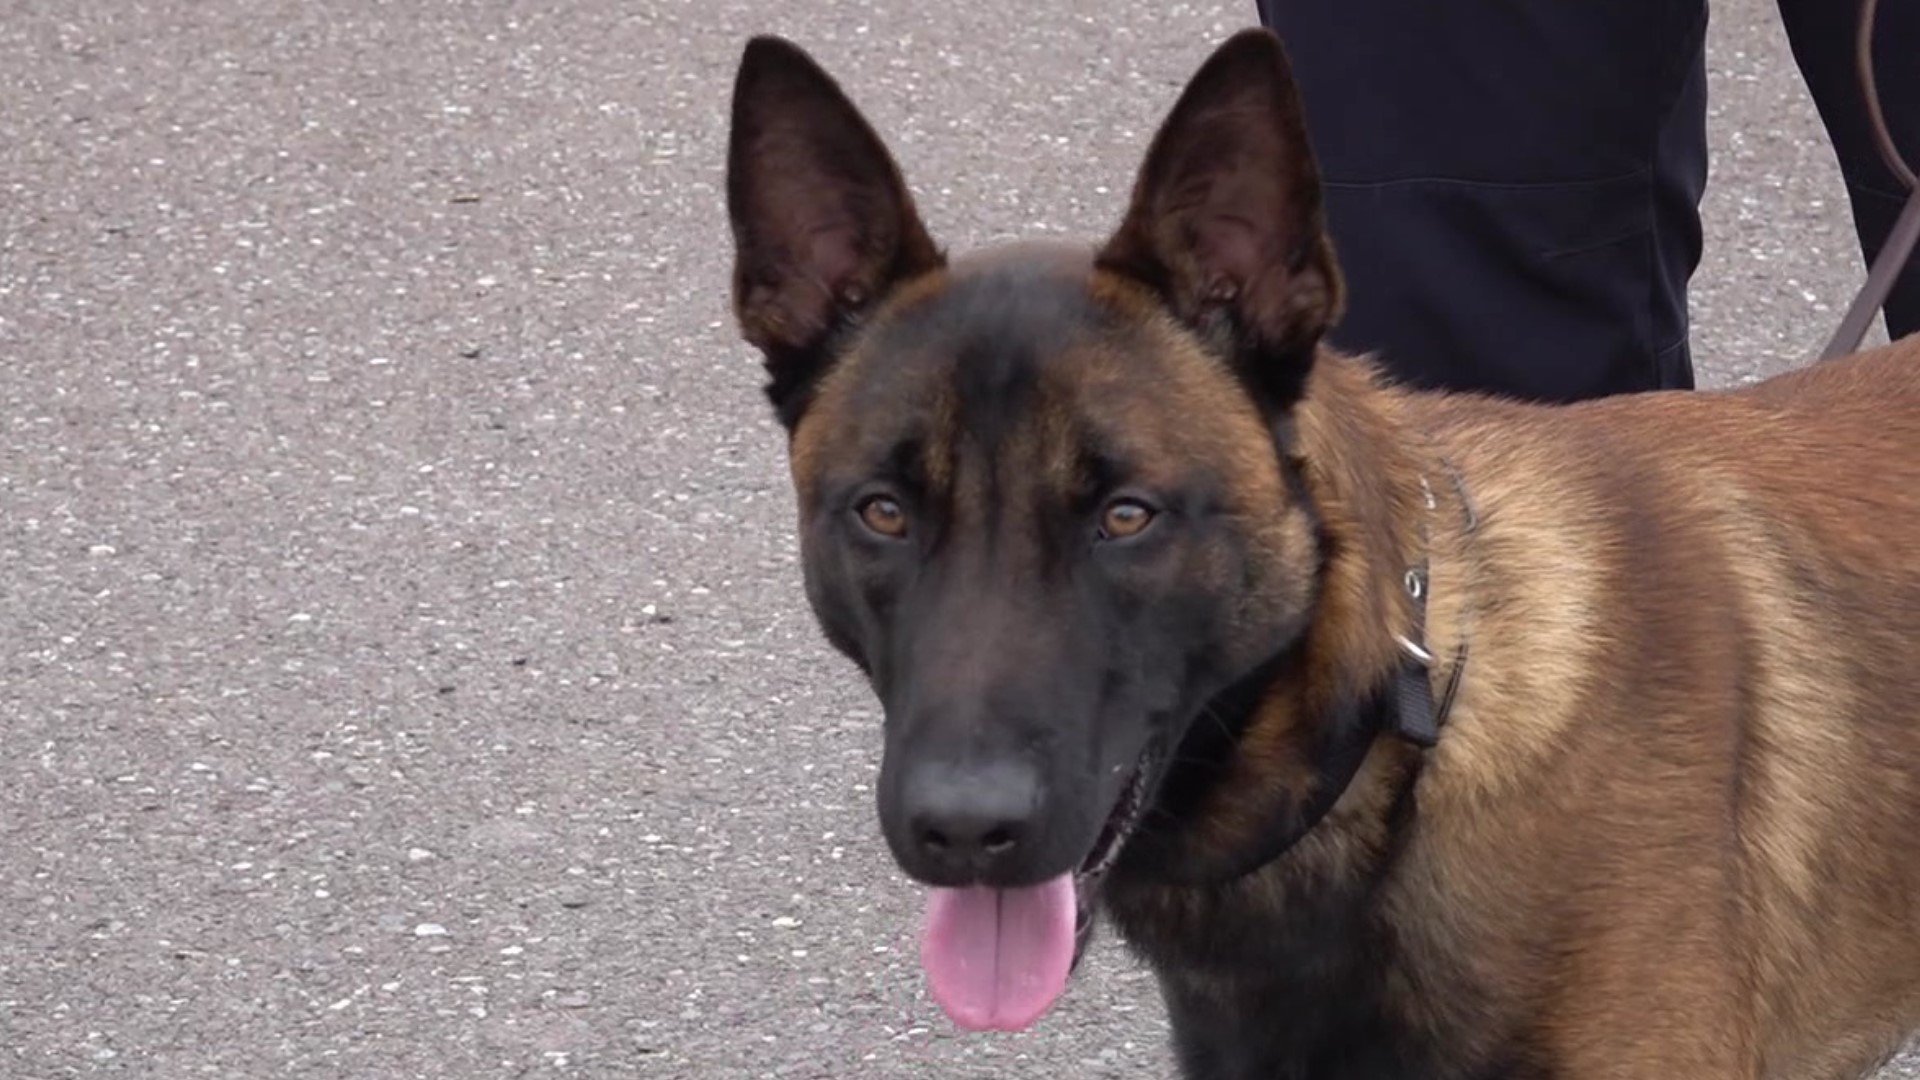 The protection of students and community members is top priority at Bloomsburg University, which is why the university added a bomb sniffing K-9 to its police dept.